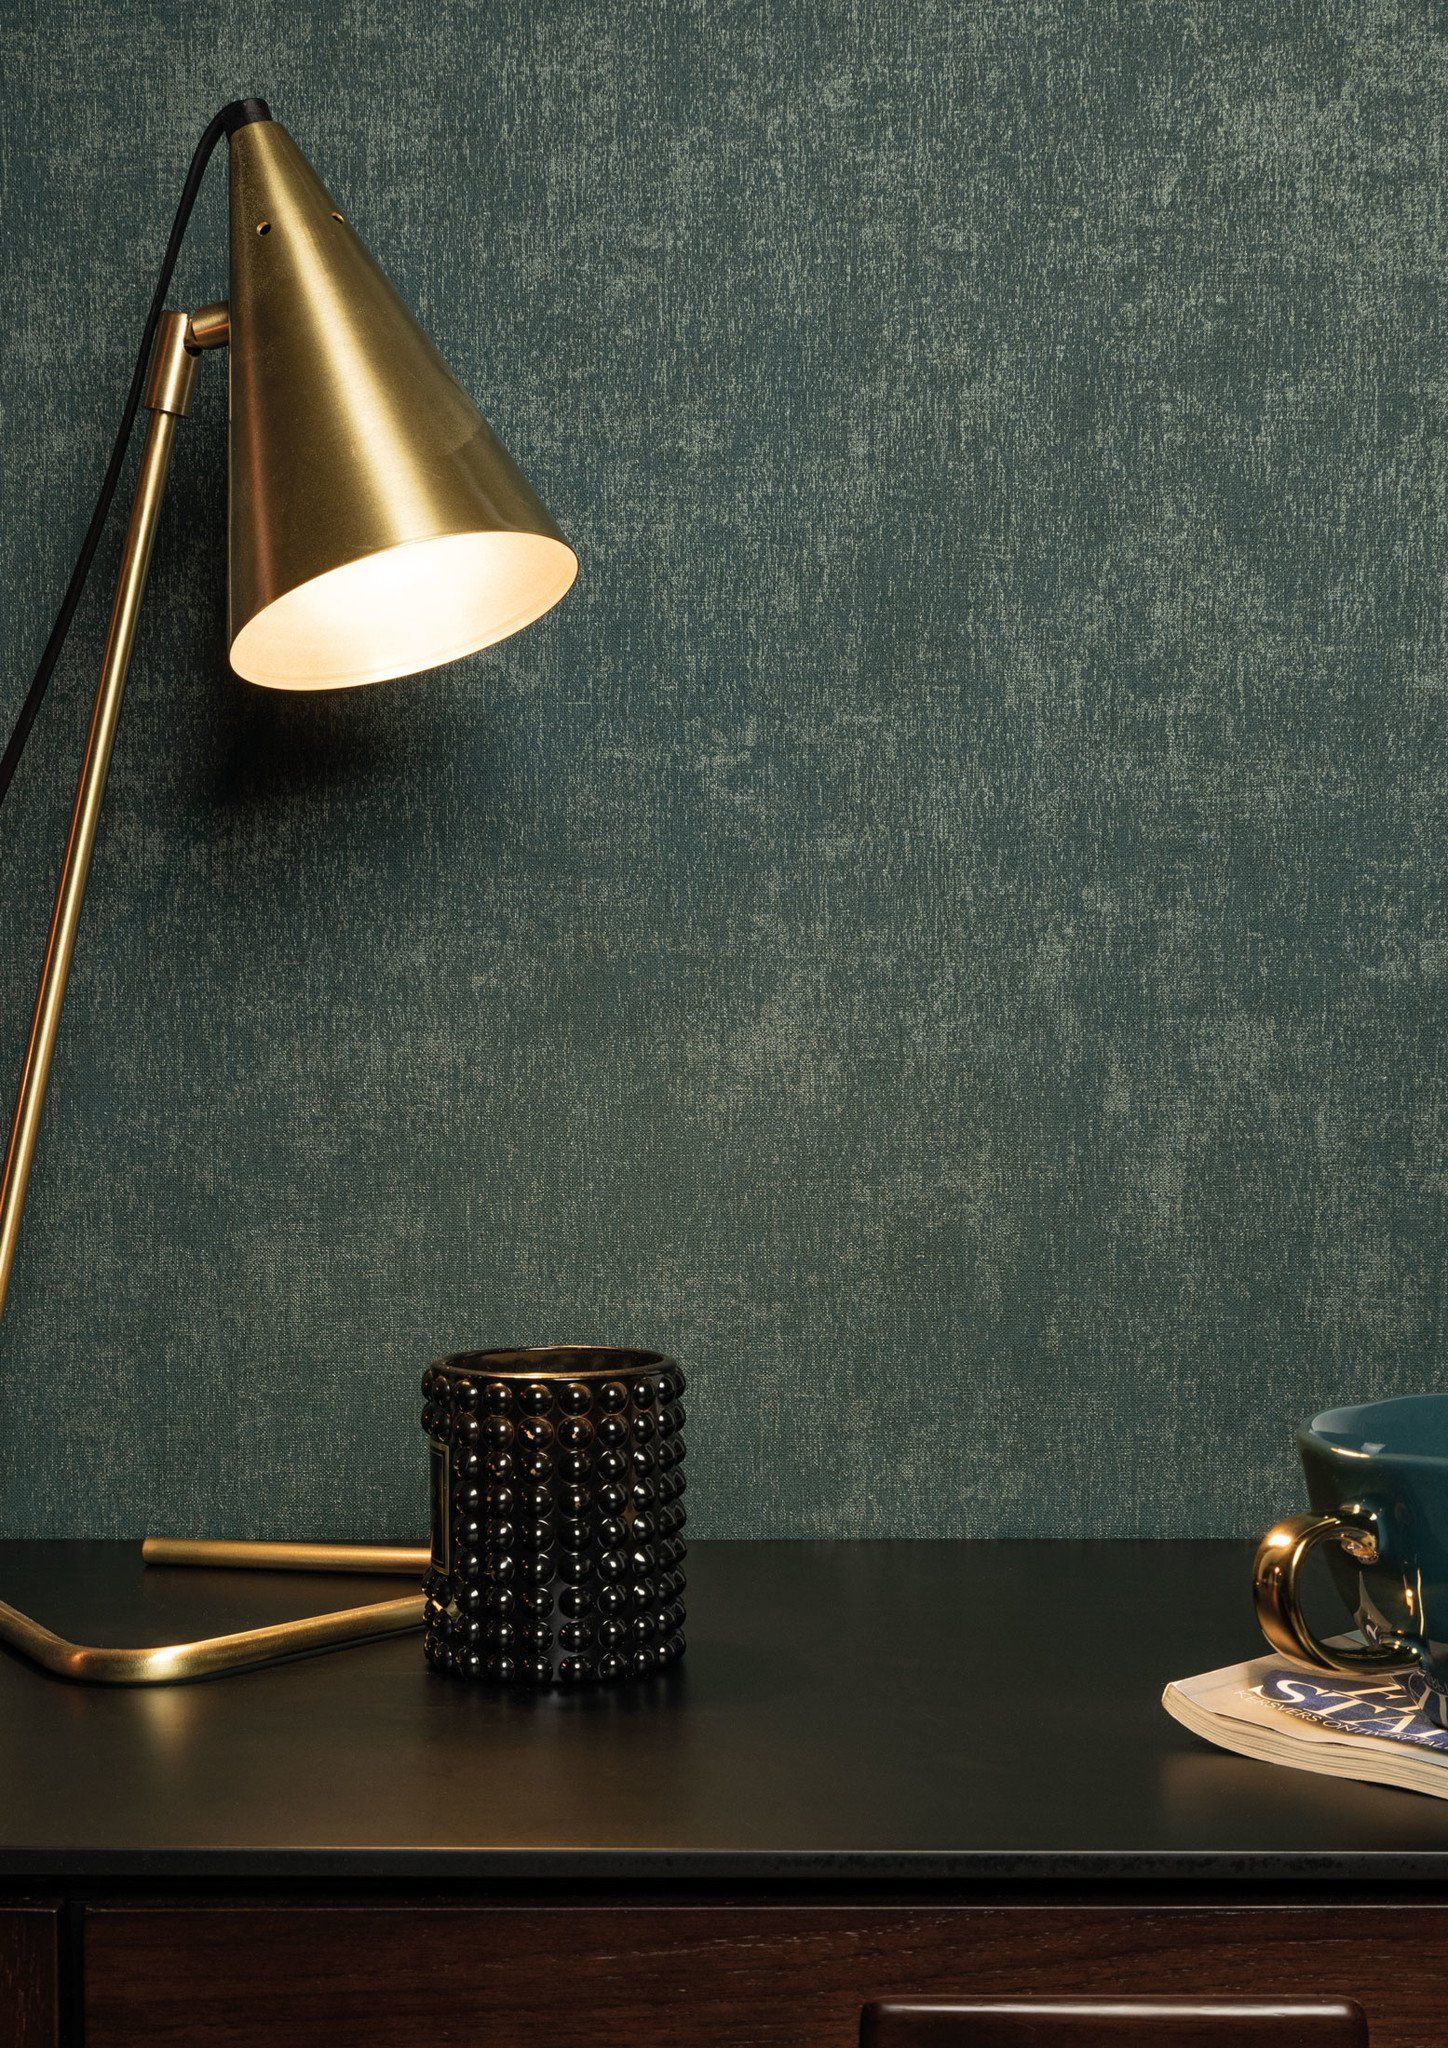 Textured Tranquility: Exploring Textured Wallpaper For Tactile Bedroom Experience